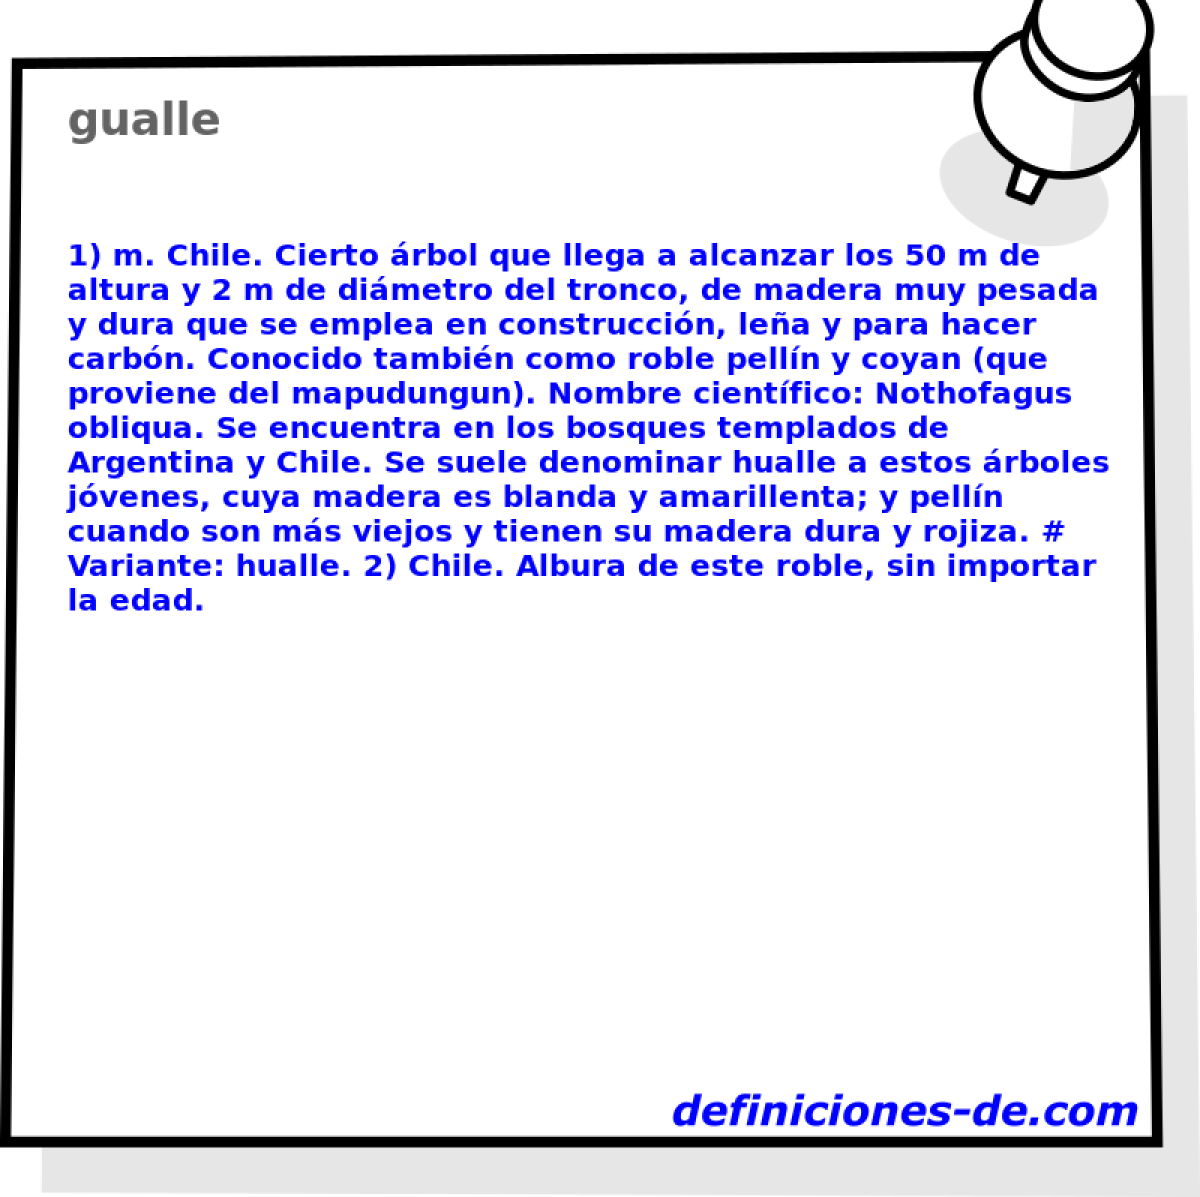 gualle 